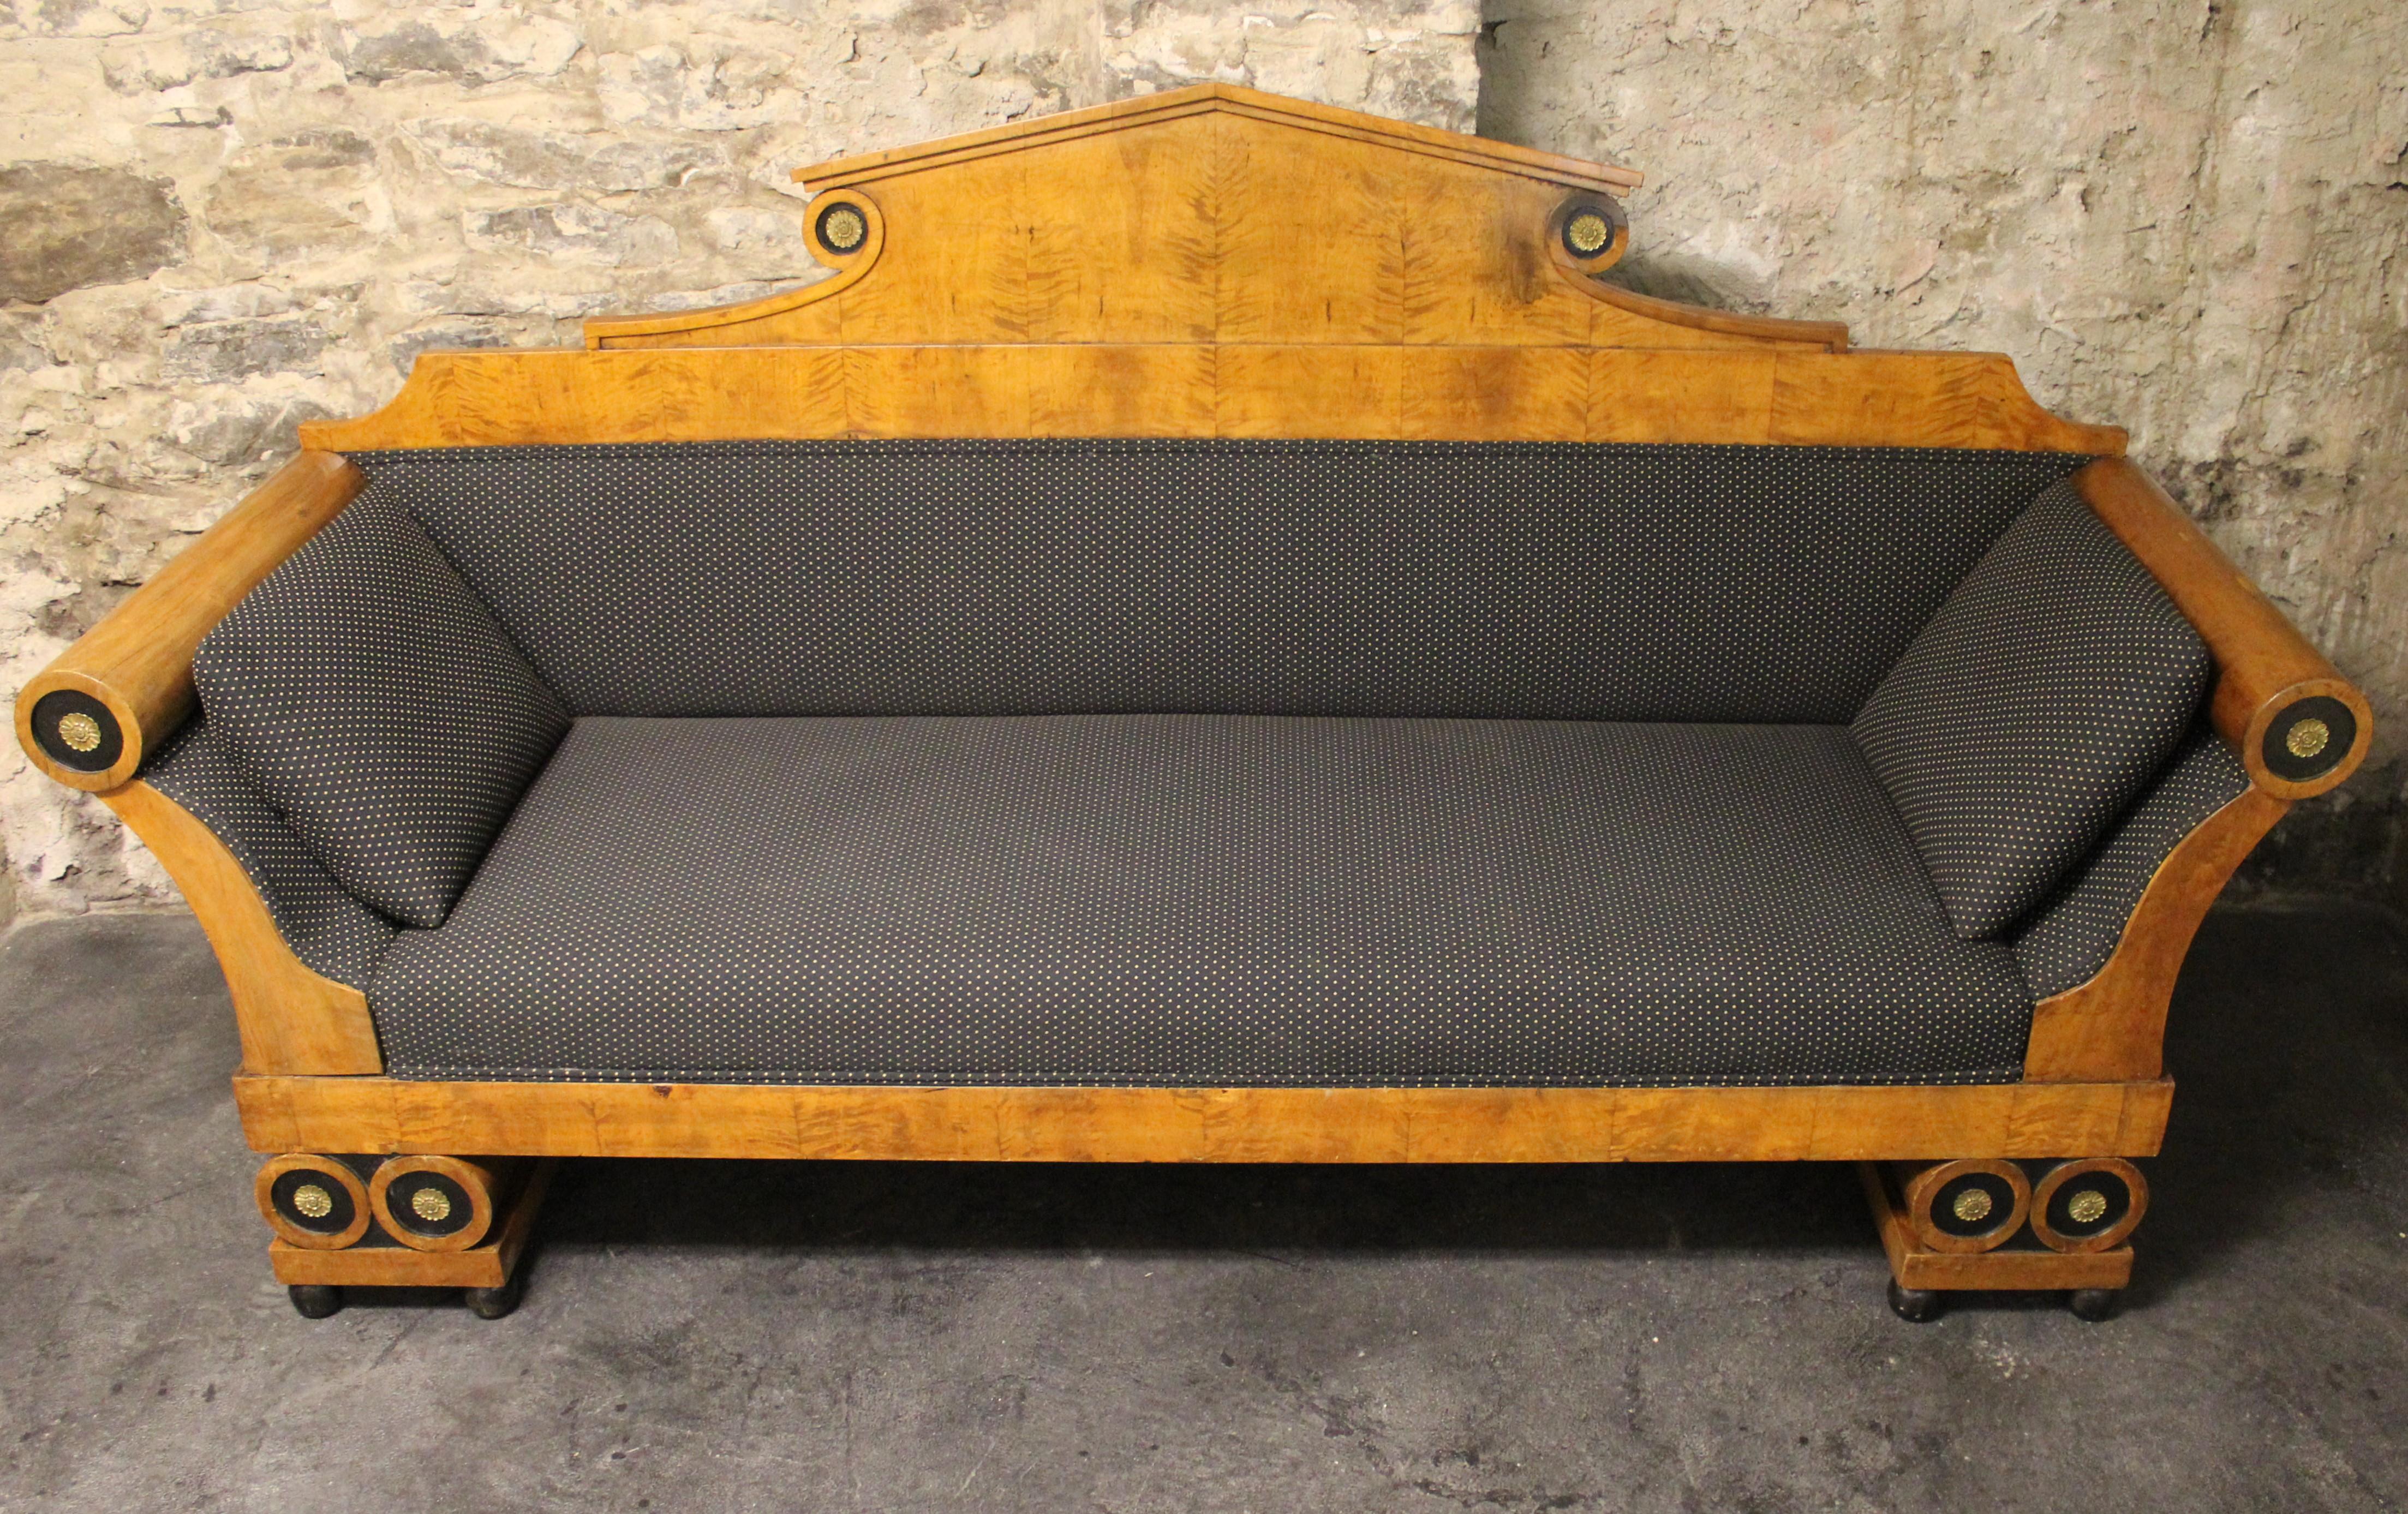 19th century Karl Johan Biedermeir sofa with upholstered seat in the empire form with bronze roundel mounts, bolstered sides and legs.